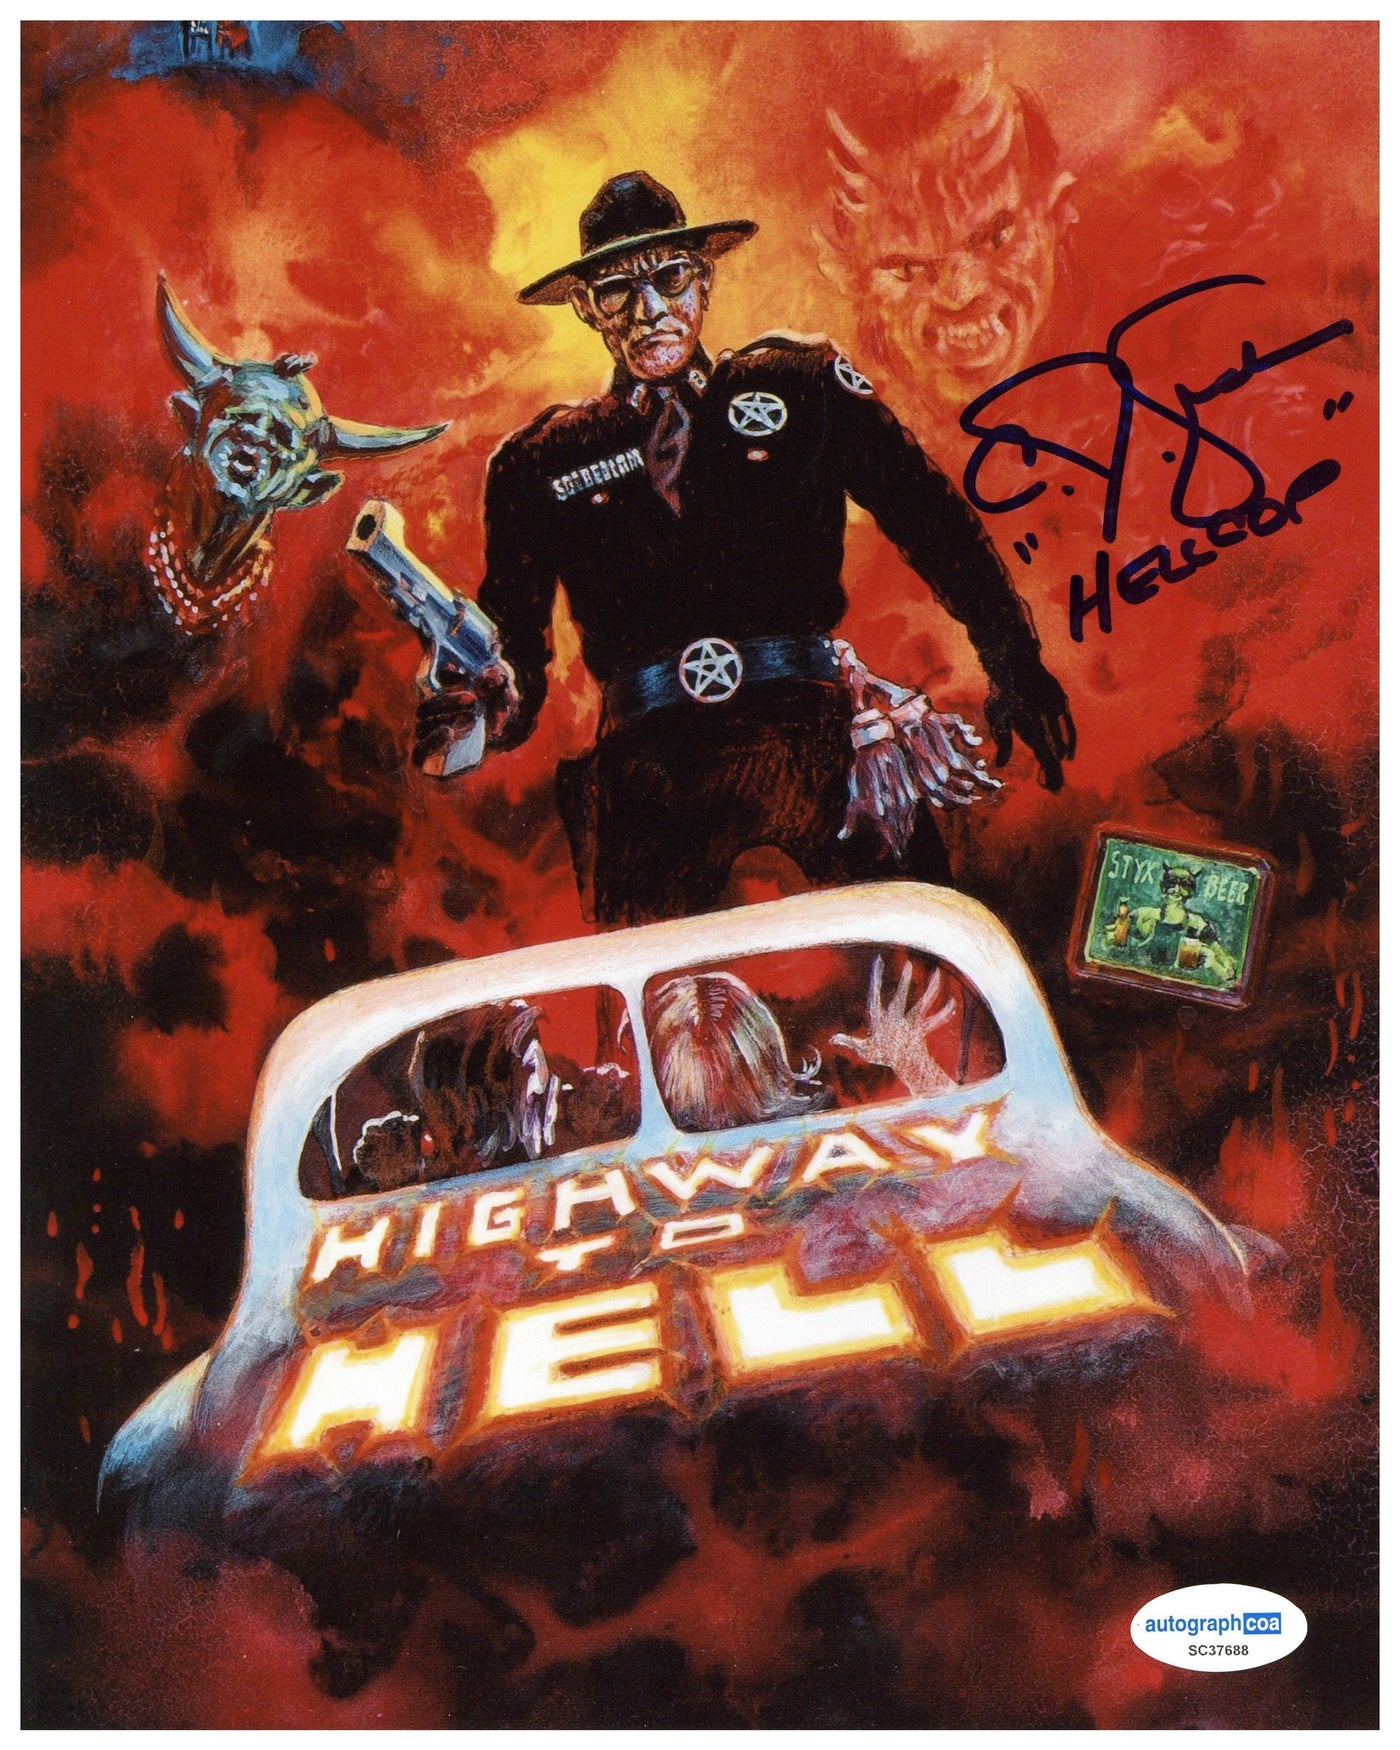 CJ Graham Signed 8x10 Photo Highway to Hell Autographed ACOA